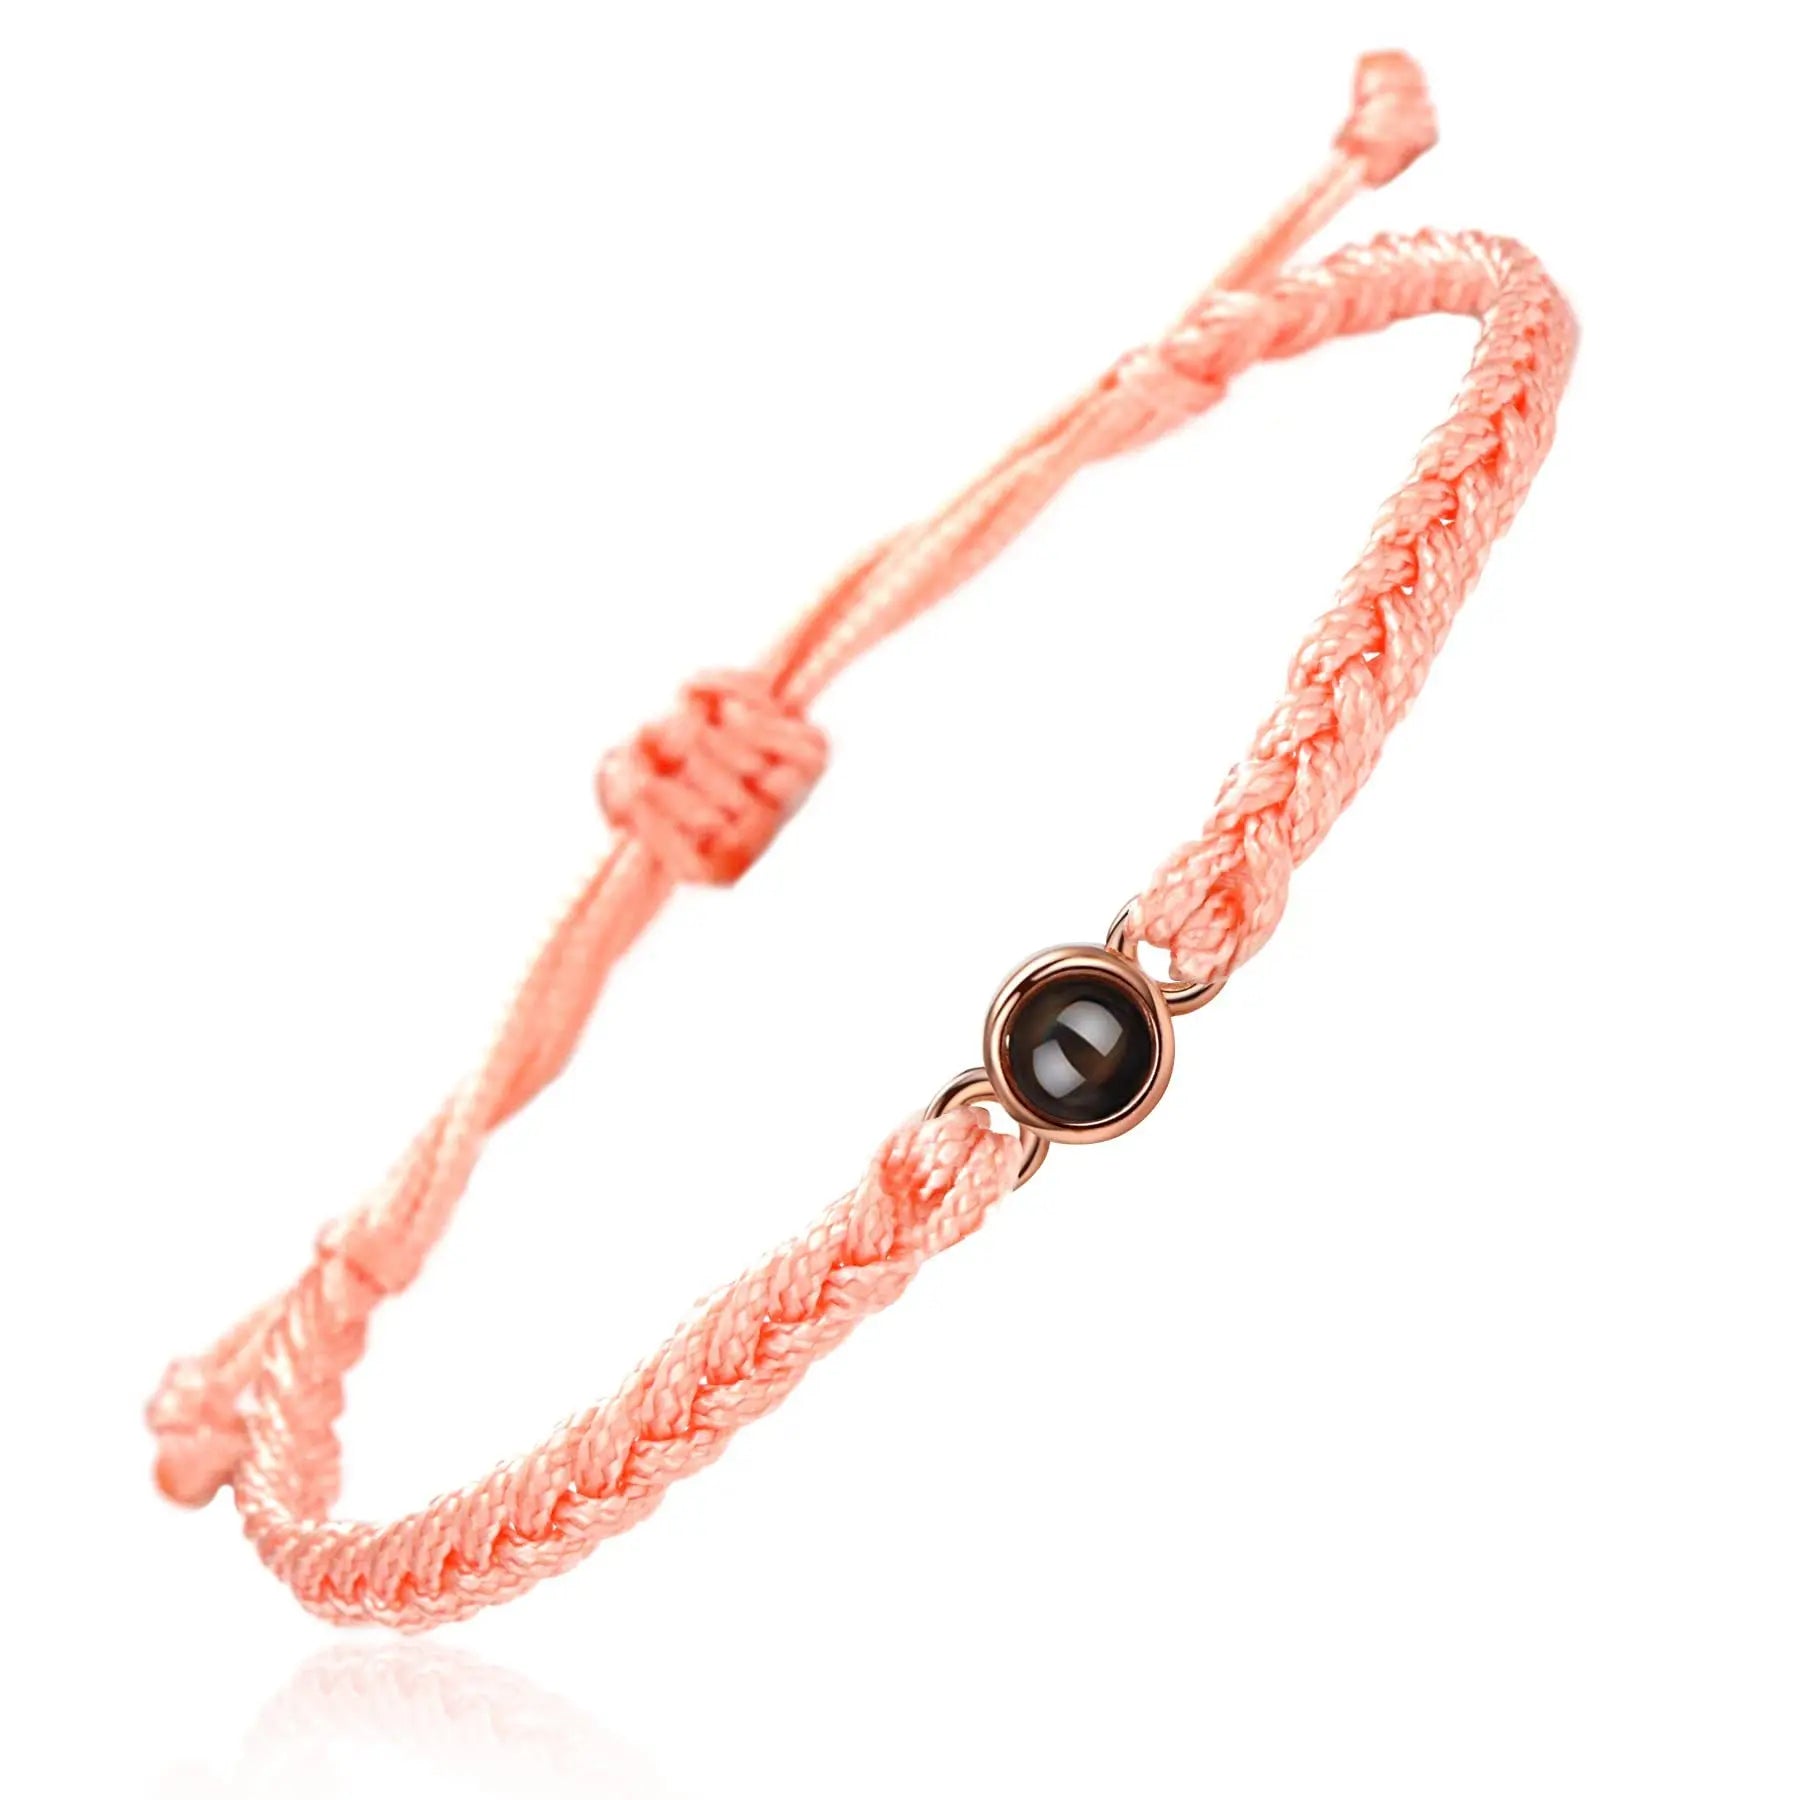 Projection Jewelry Classic Hand-Woven Ropes Custom Bracelets With Personalized Photos Suitable For Holiday Commemorative Gifts Pink plus rose gold - IHavePaws